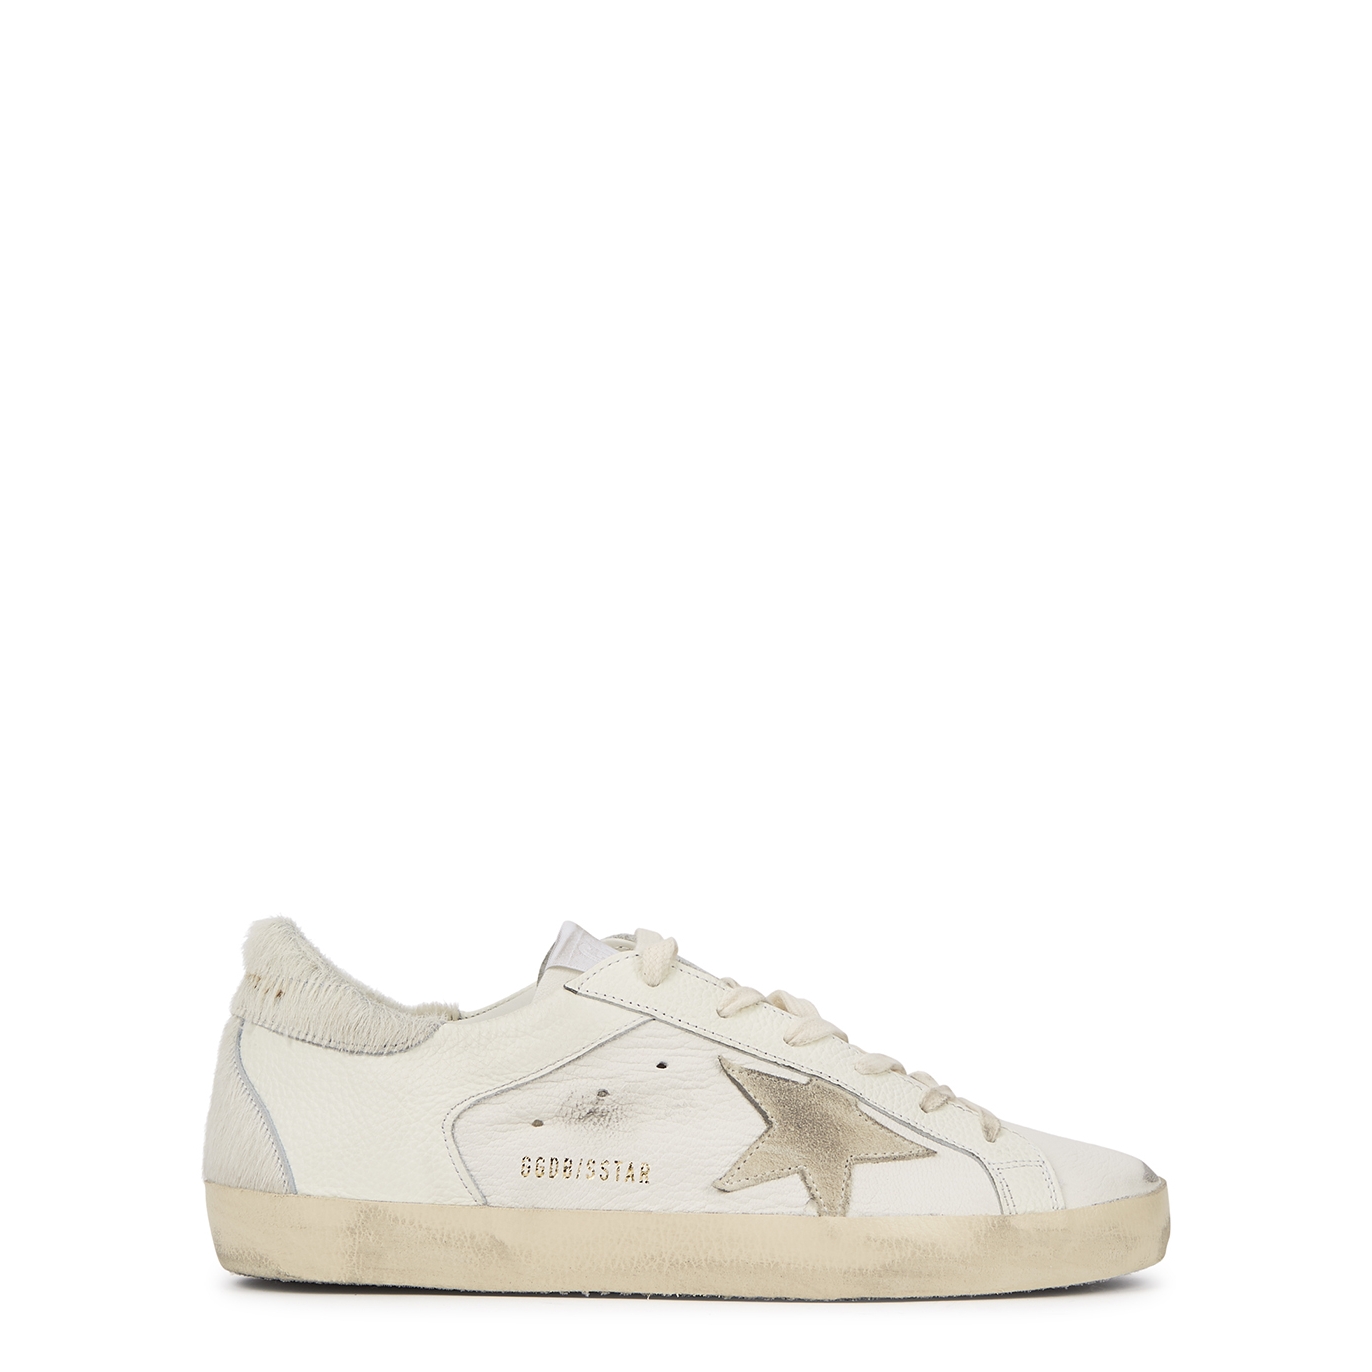 Golden Goose Superstar Distressed Leather Sneakers - White And Grey - 5